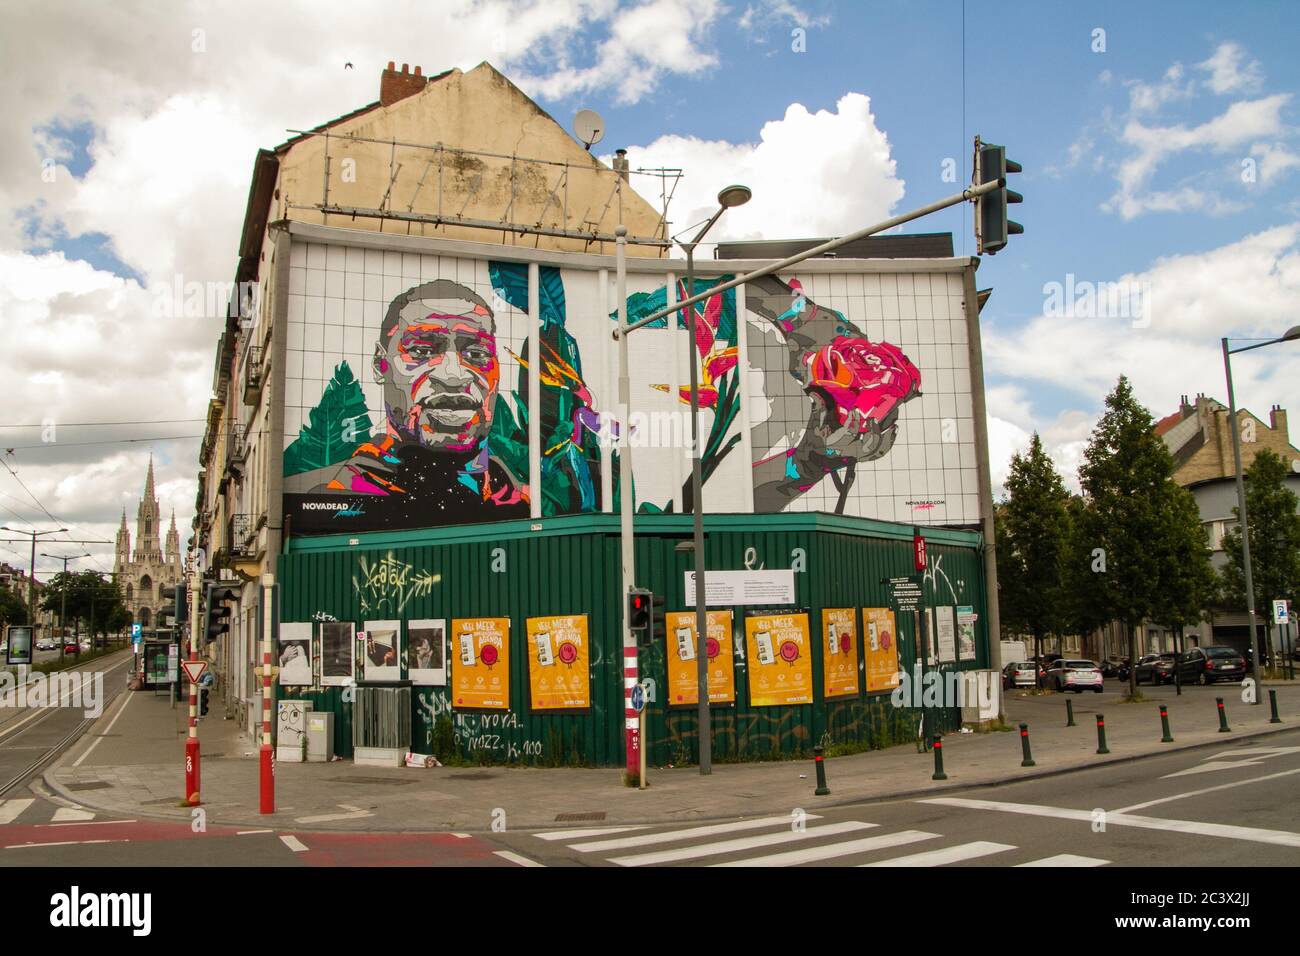 On June 18, 2020, the City of Brussels inaugurated a fresco by artist Novadead in tribute to George Floyd. This fresco is part of the Street Art route Stock Photo